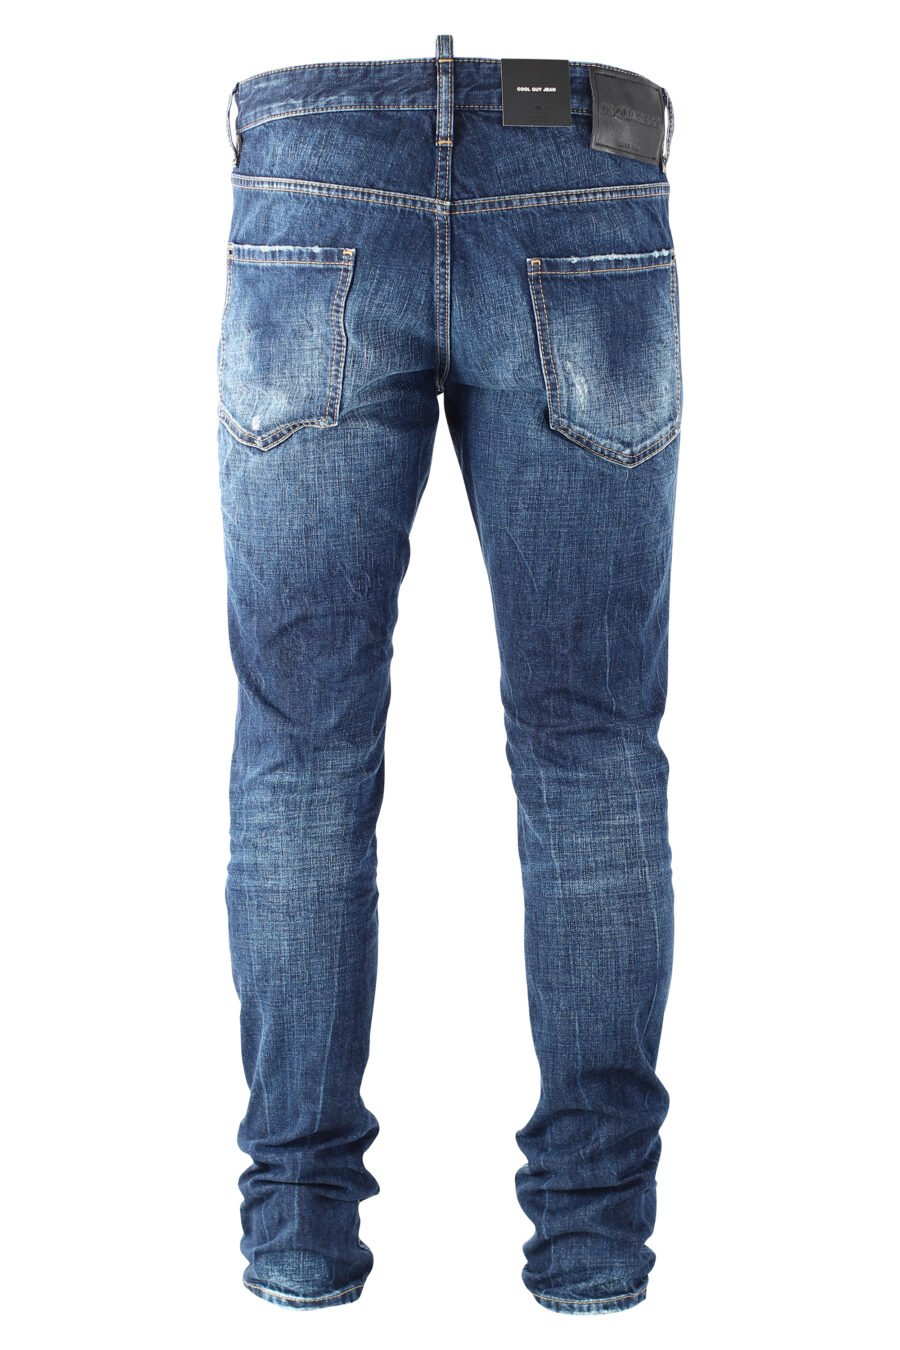 Jeans "cool guy jean" blue with black "D2" logo - IMG 9689